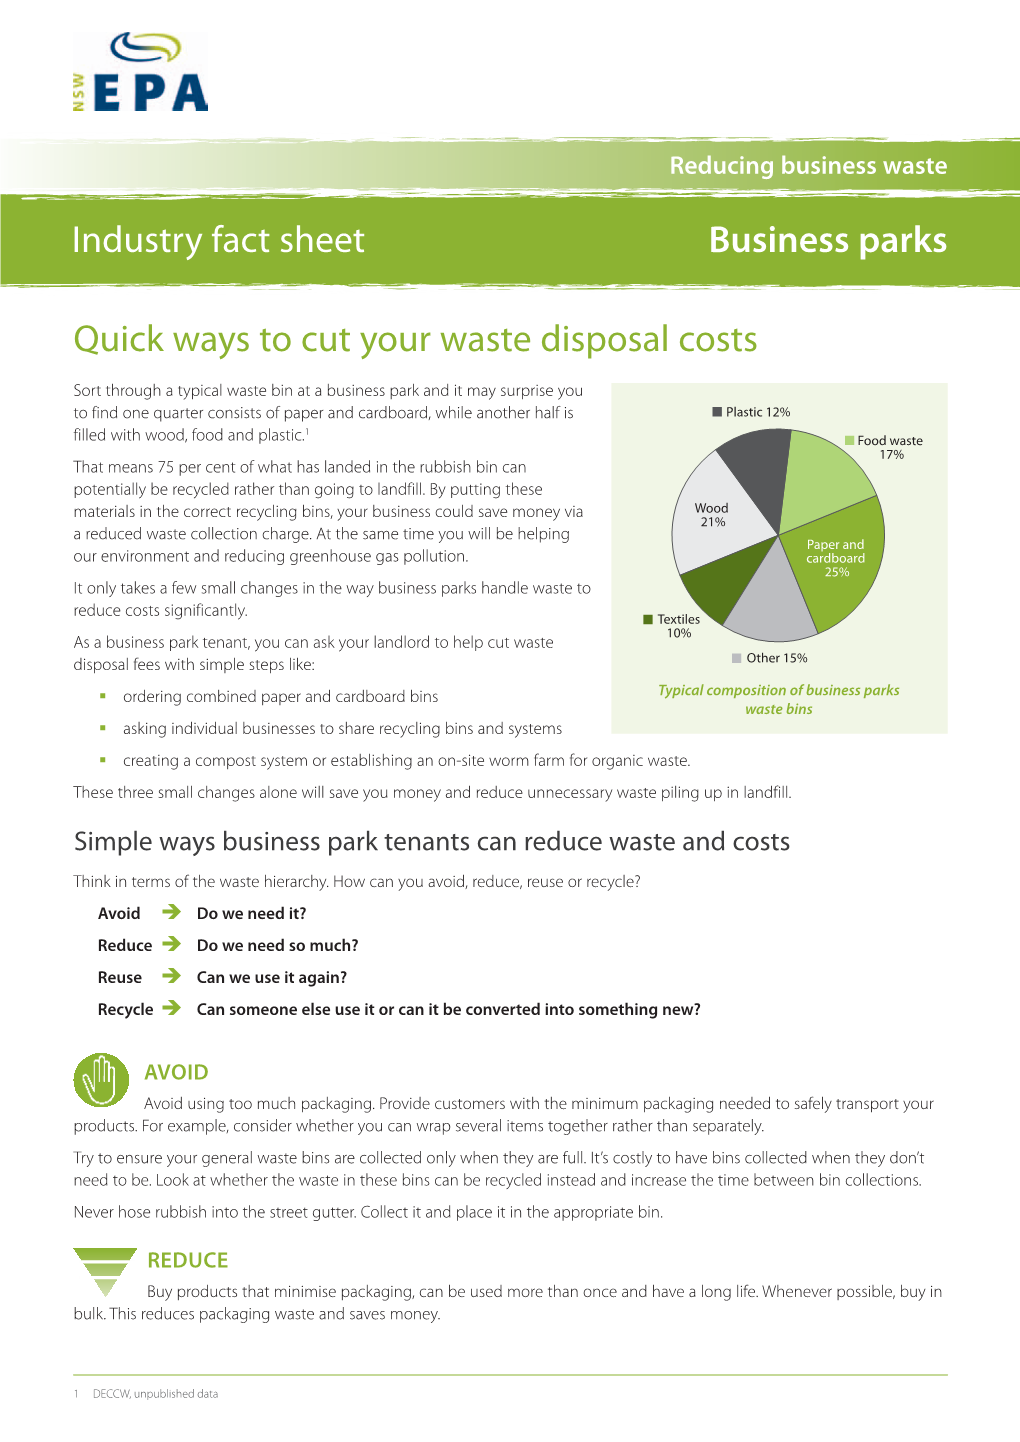 Reducing Business Waste Industry Fact Sheet: Business Parks